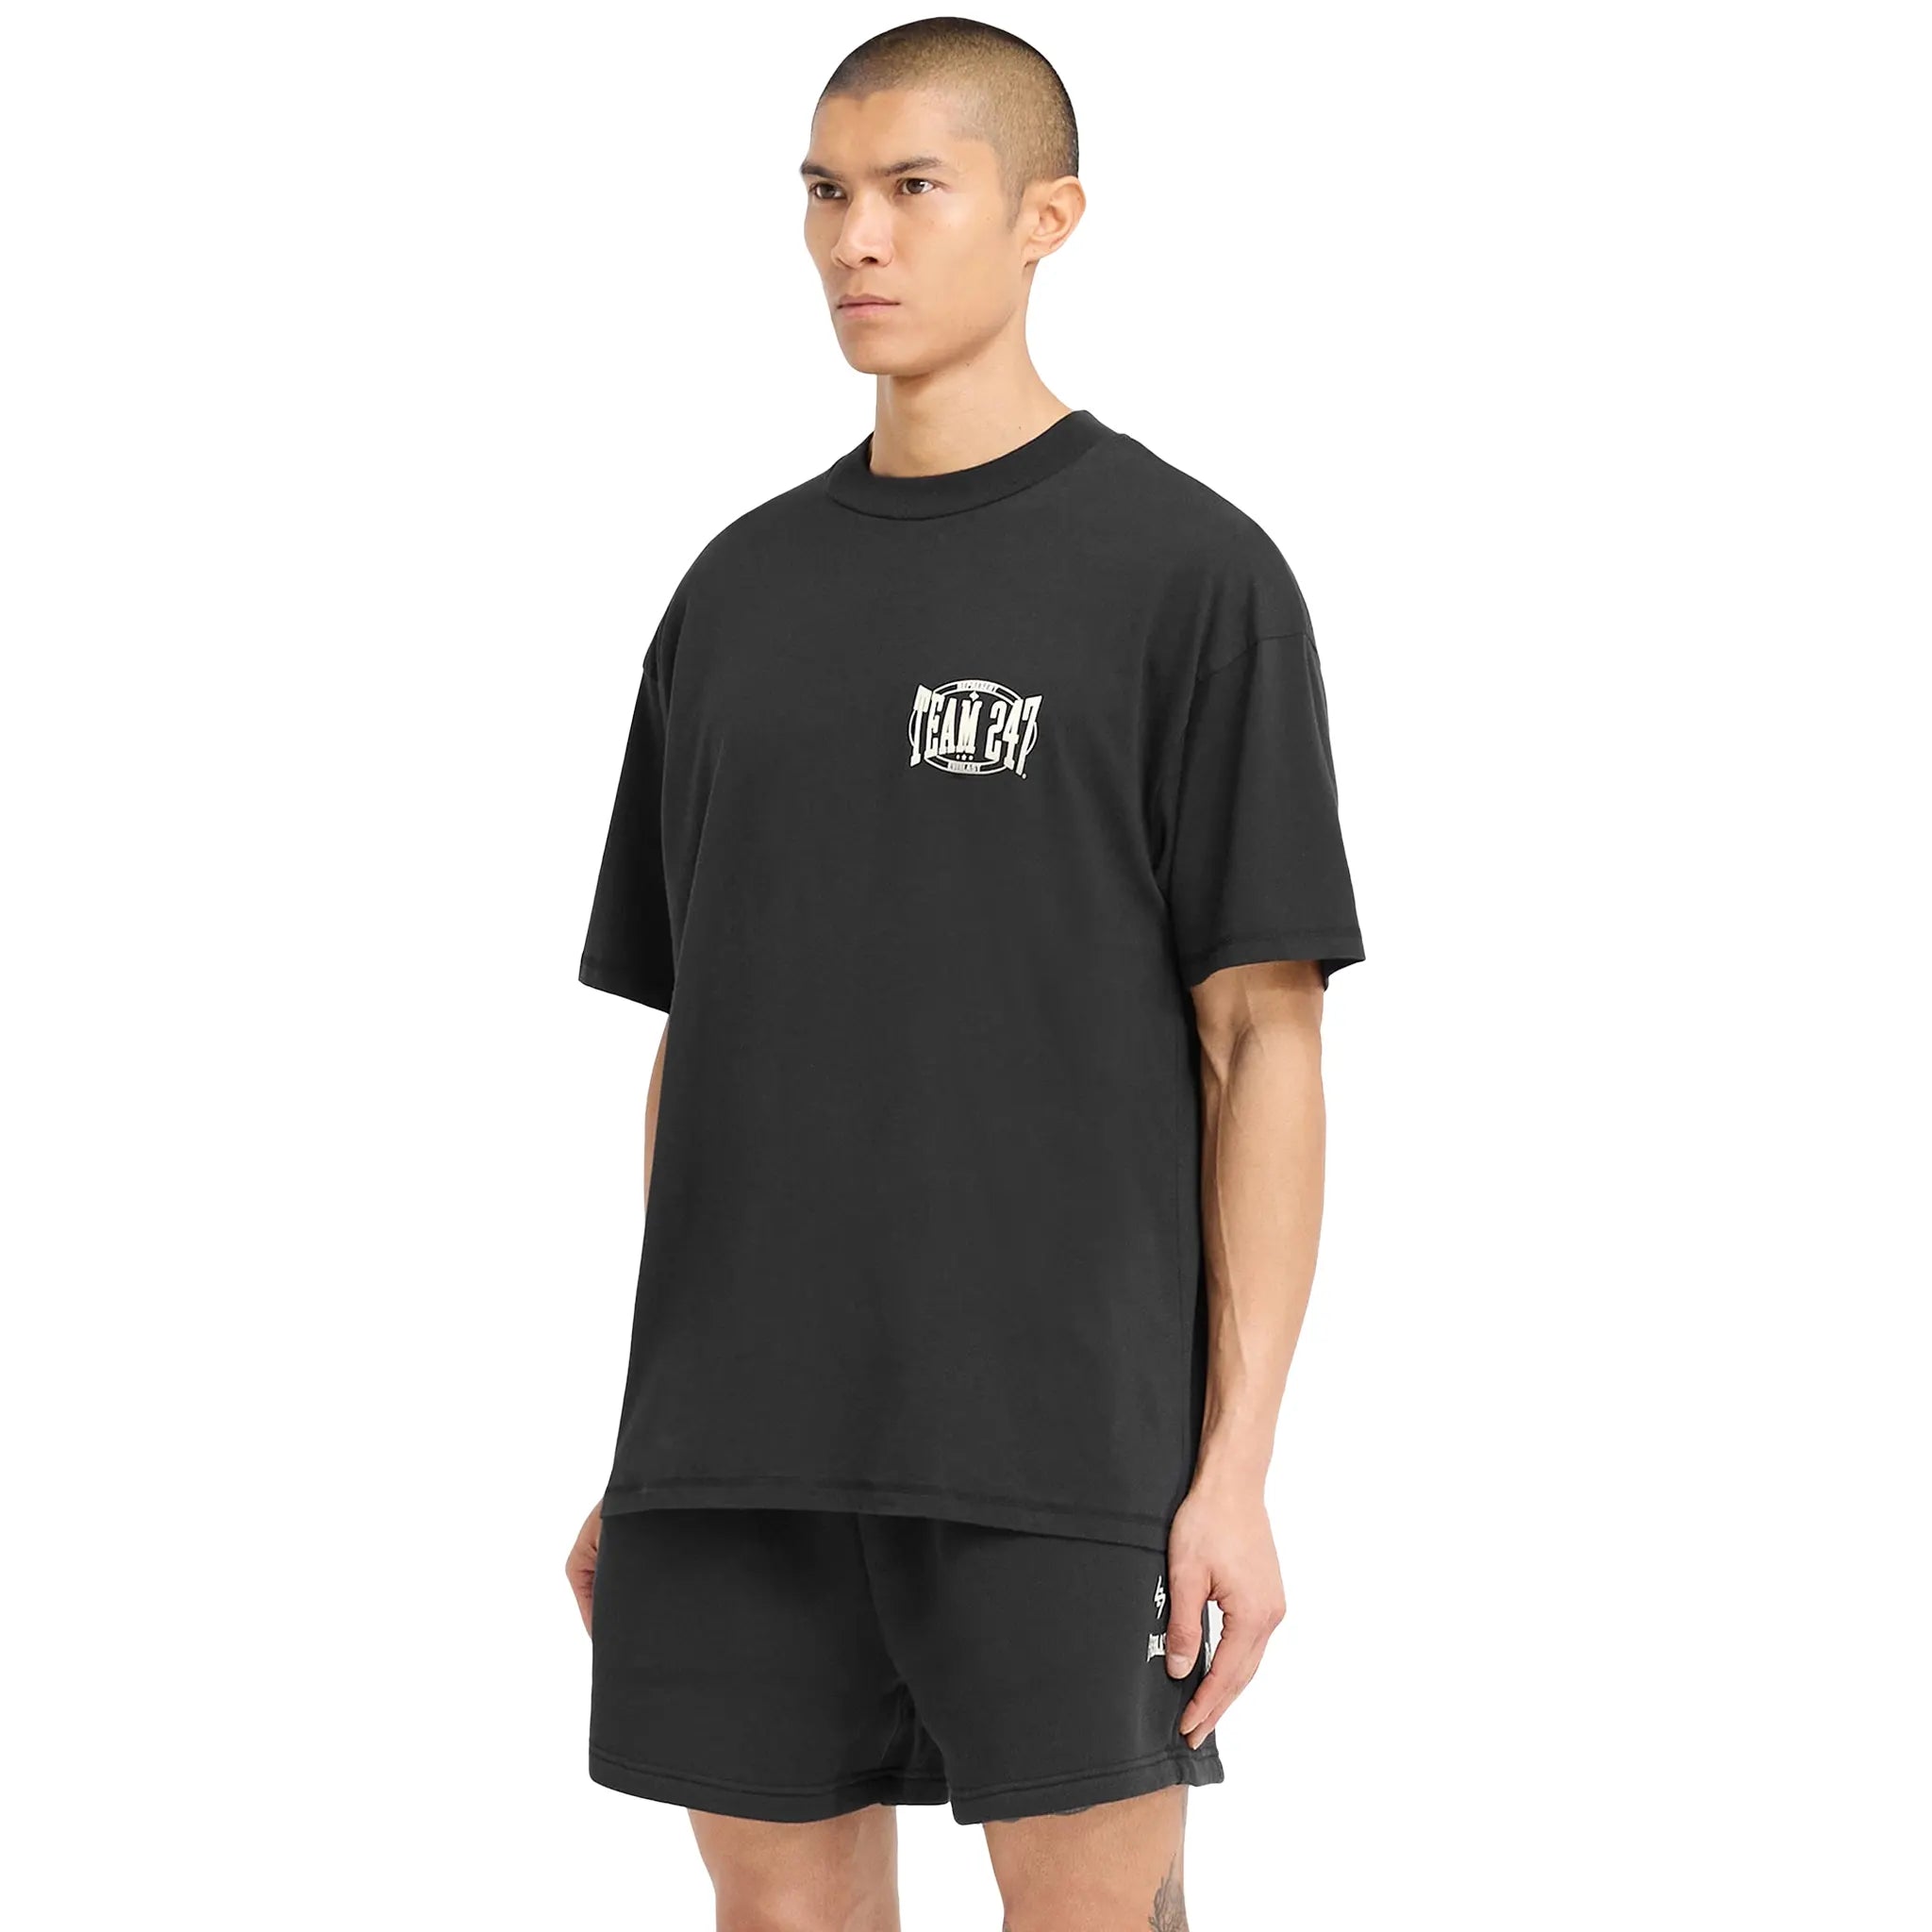 Side Detail view of Represent 247 X Everlast Training Camp Off Black T Shirt 247M482-171